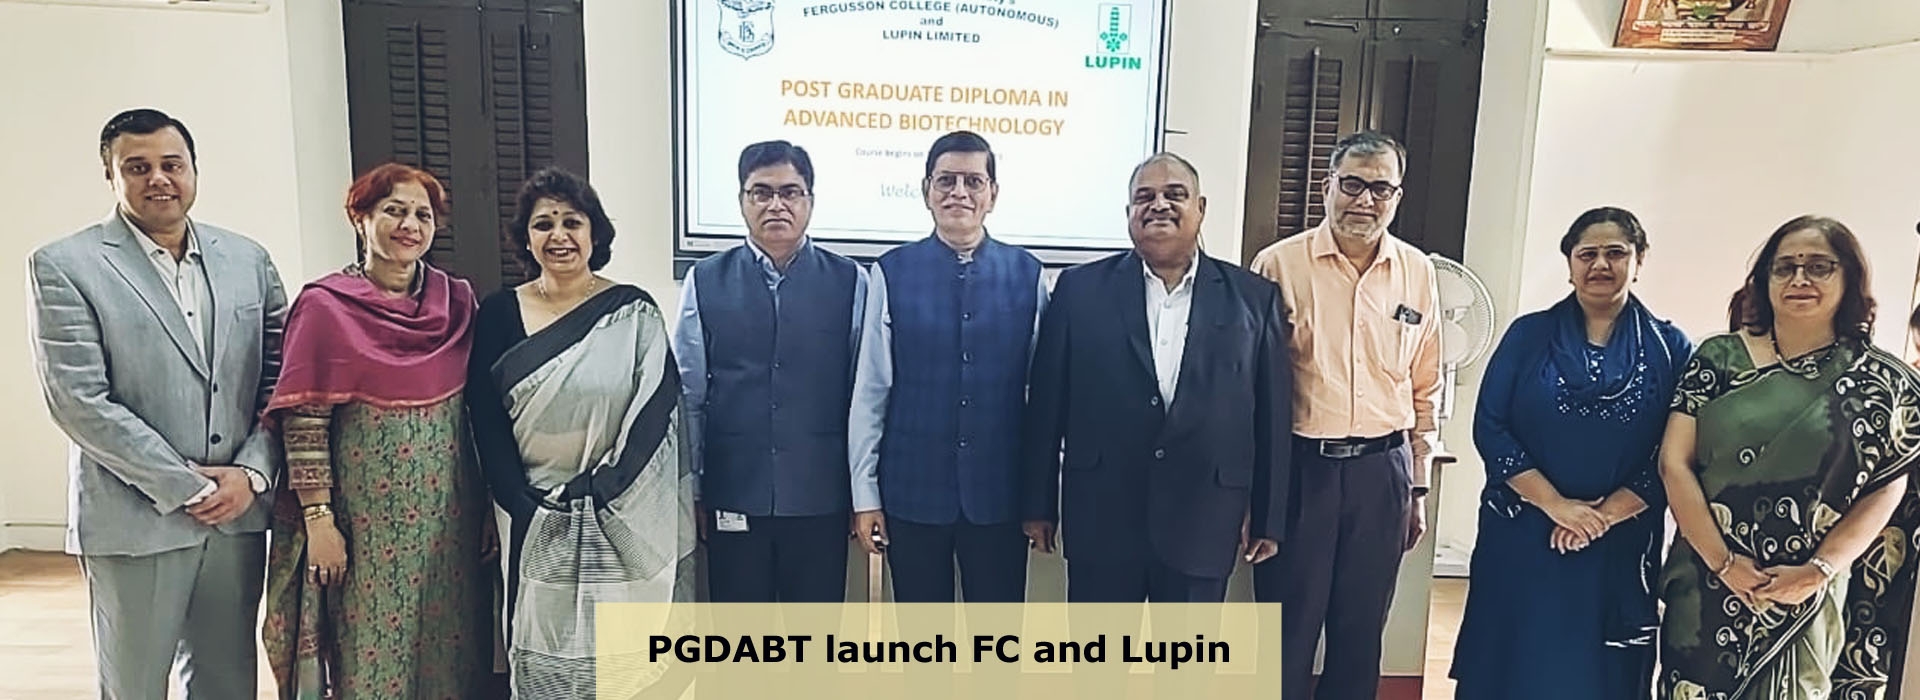 PGDABT launch FC and Lupin_1